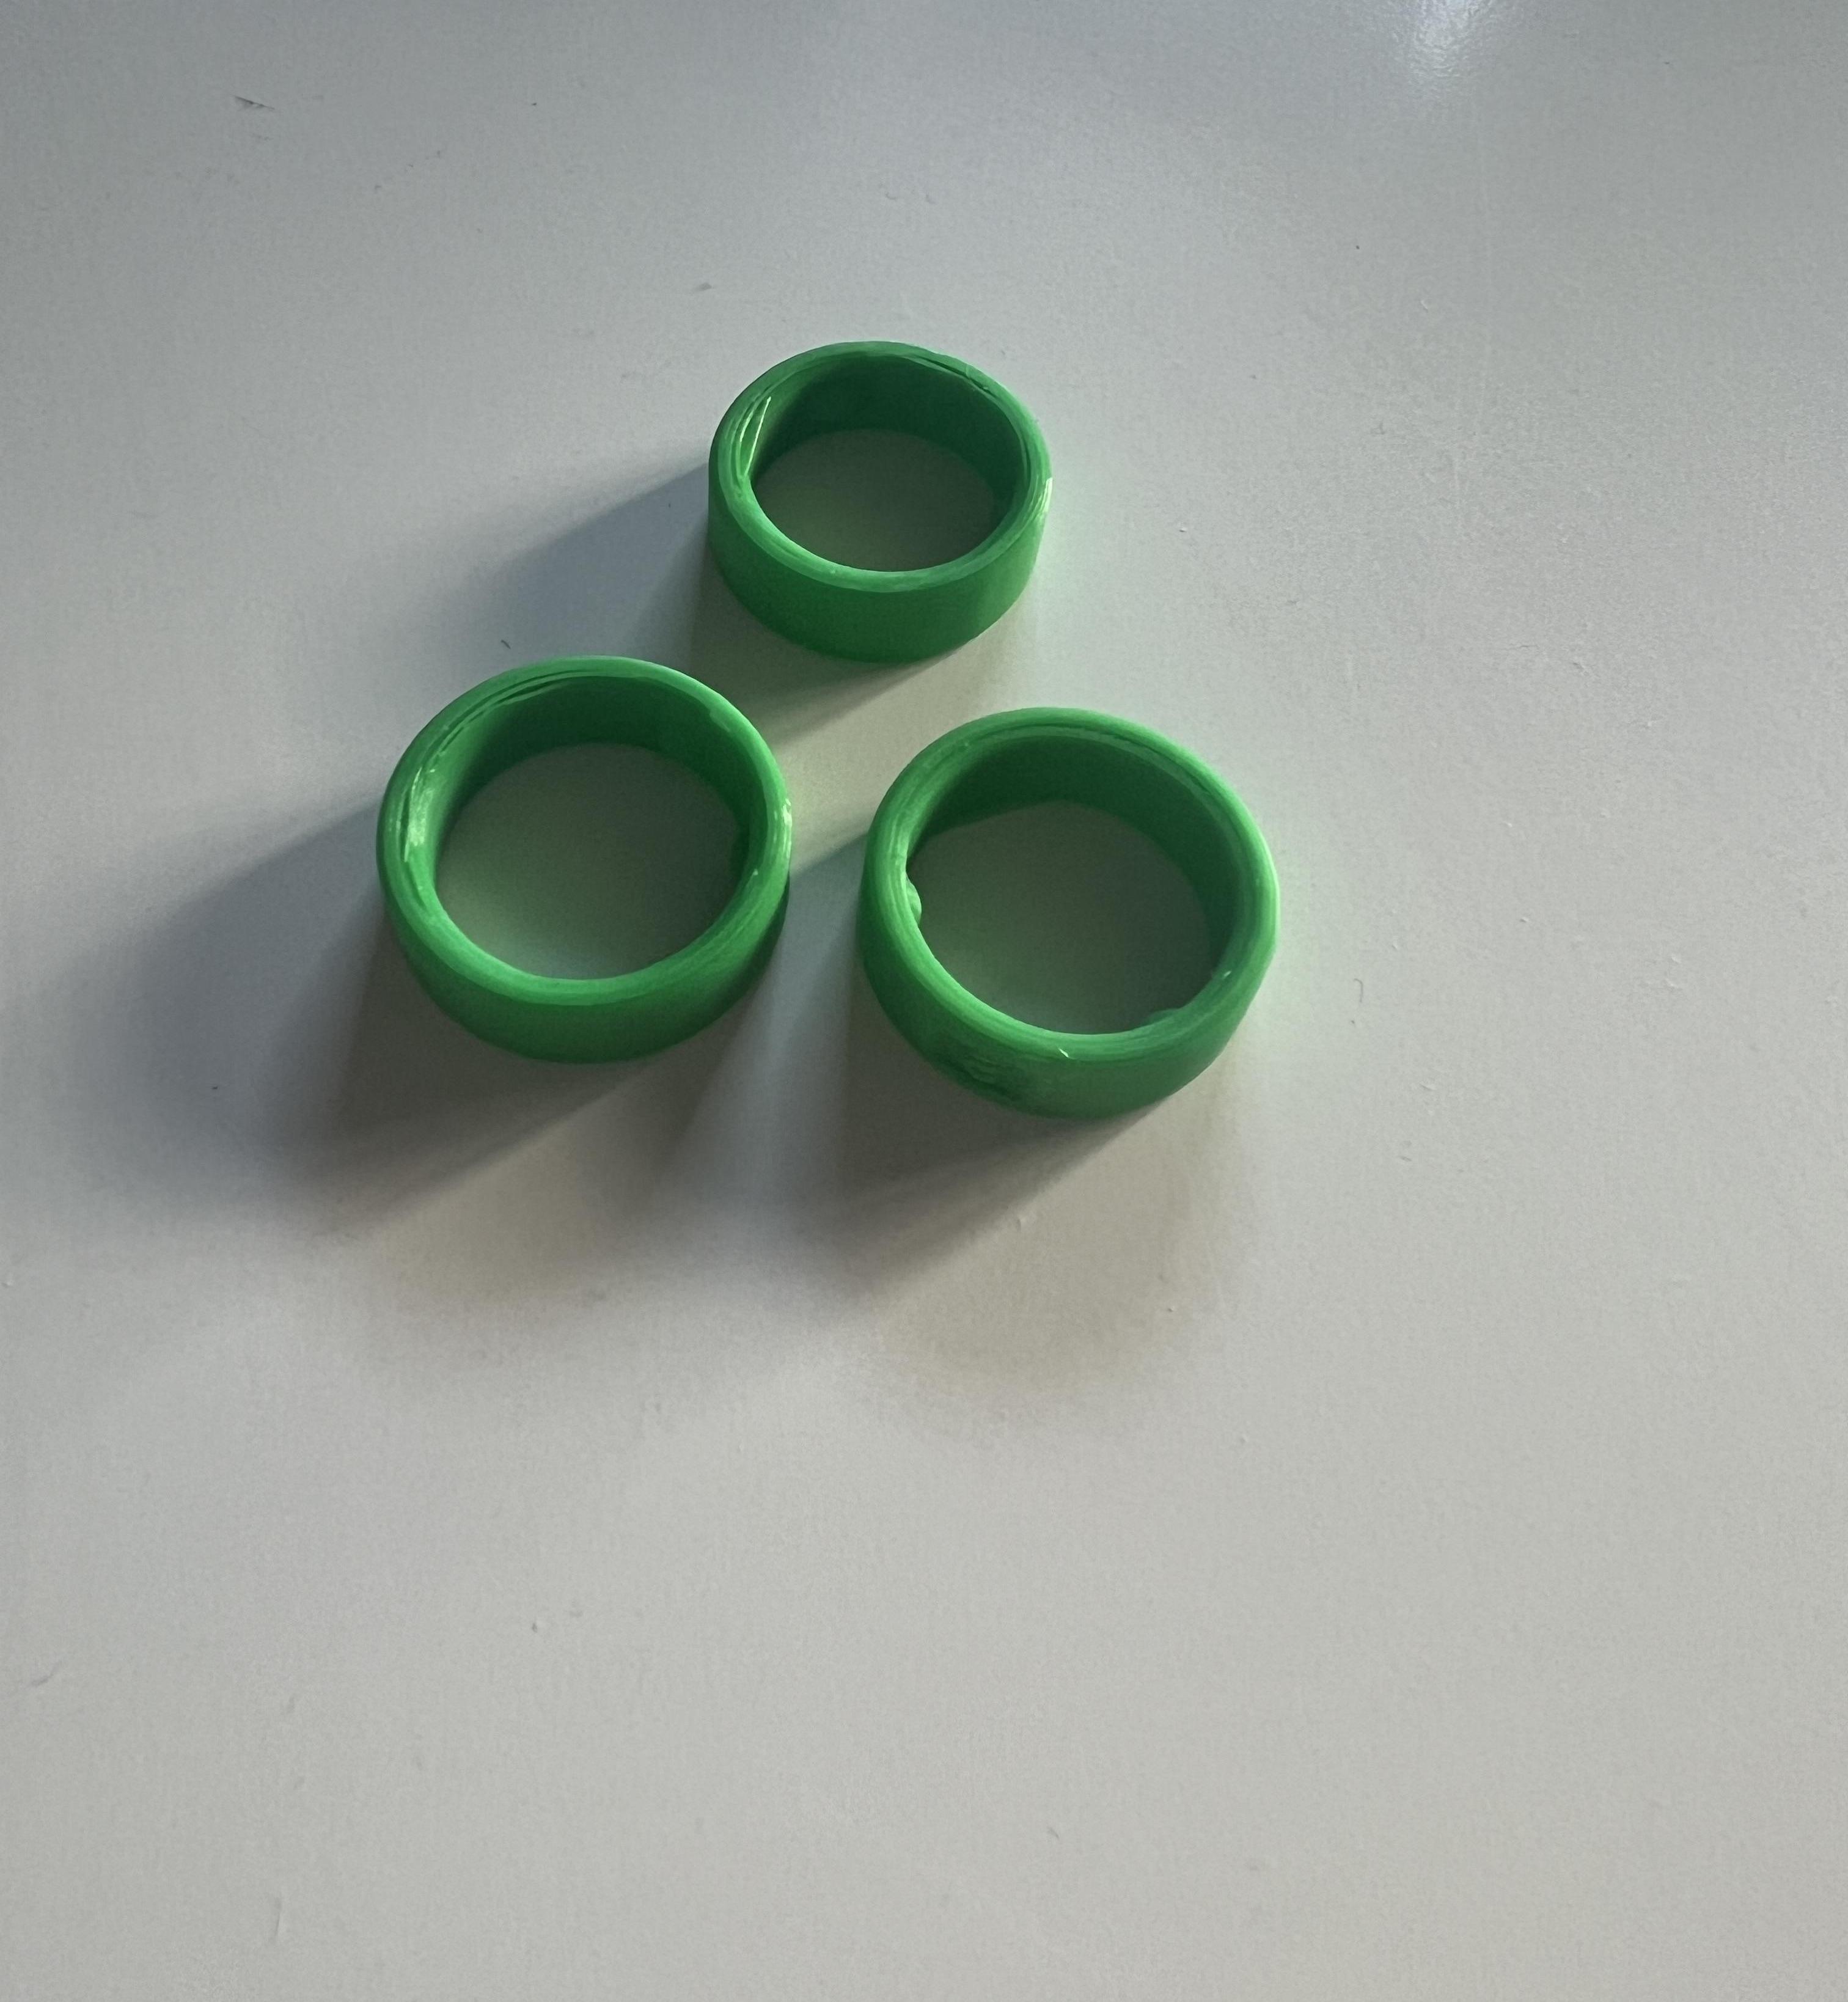 How to Size an Aura Ring, or Any Other Piece of Jewellery, With a 3D-printer